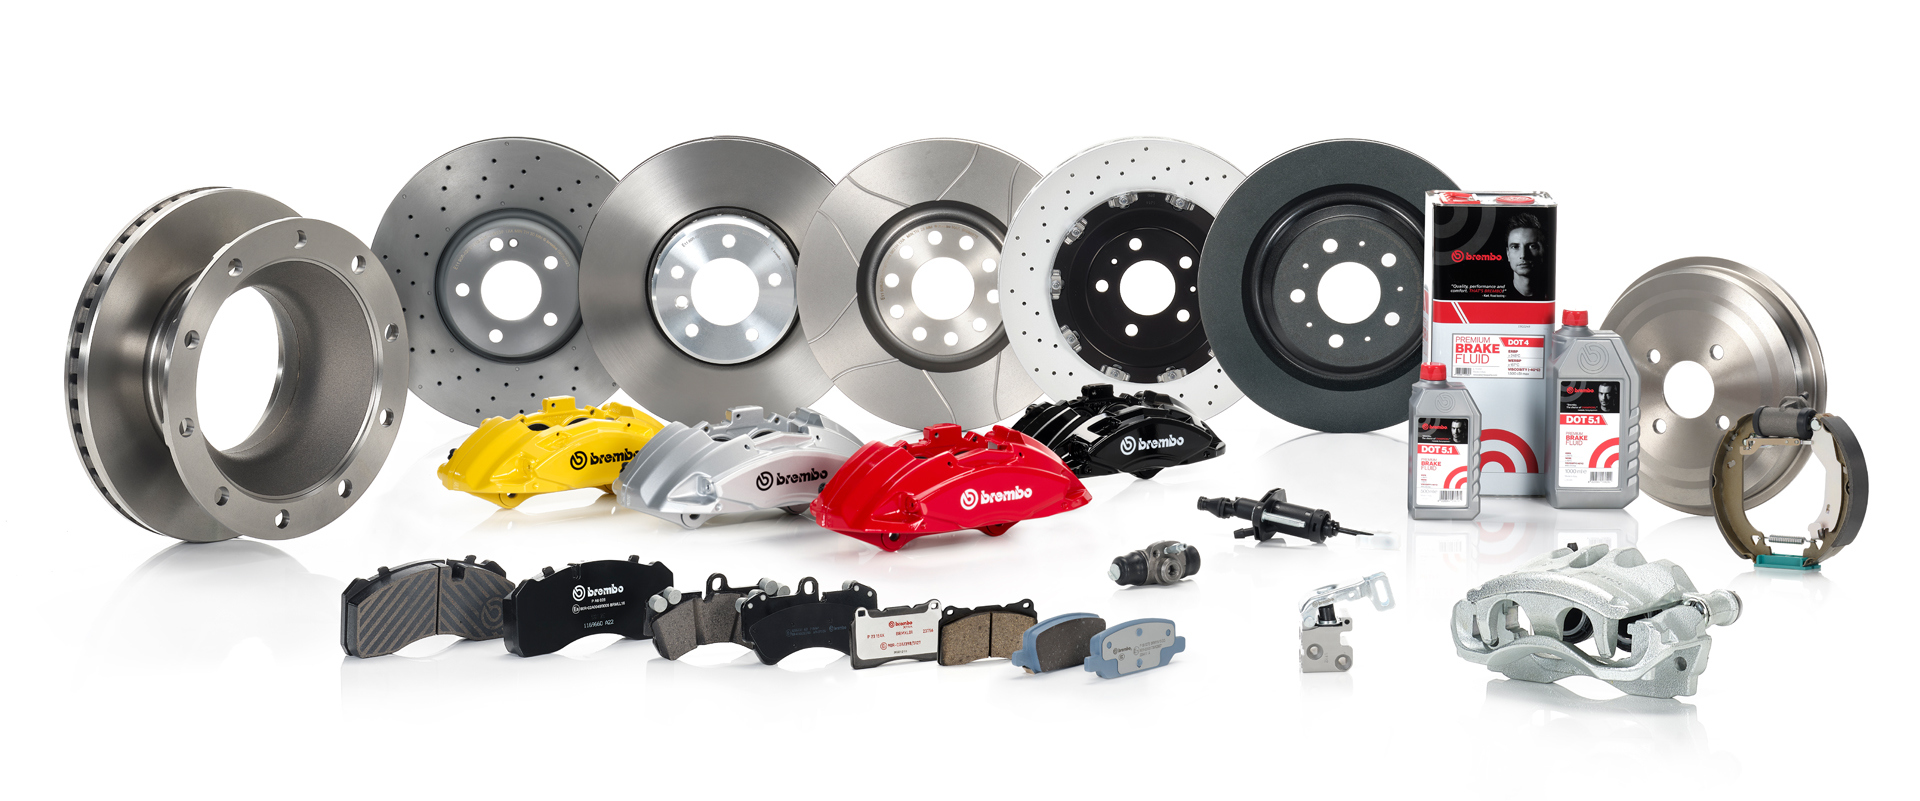 Four Brembo Aftermarket product ranges: Essential, Prime, Beyond and Xtra